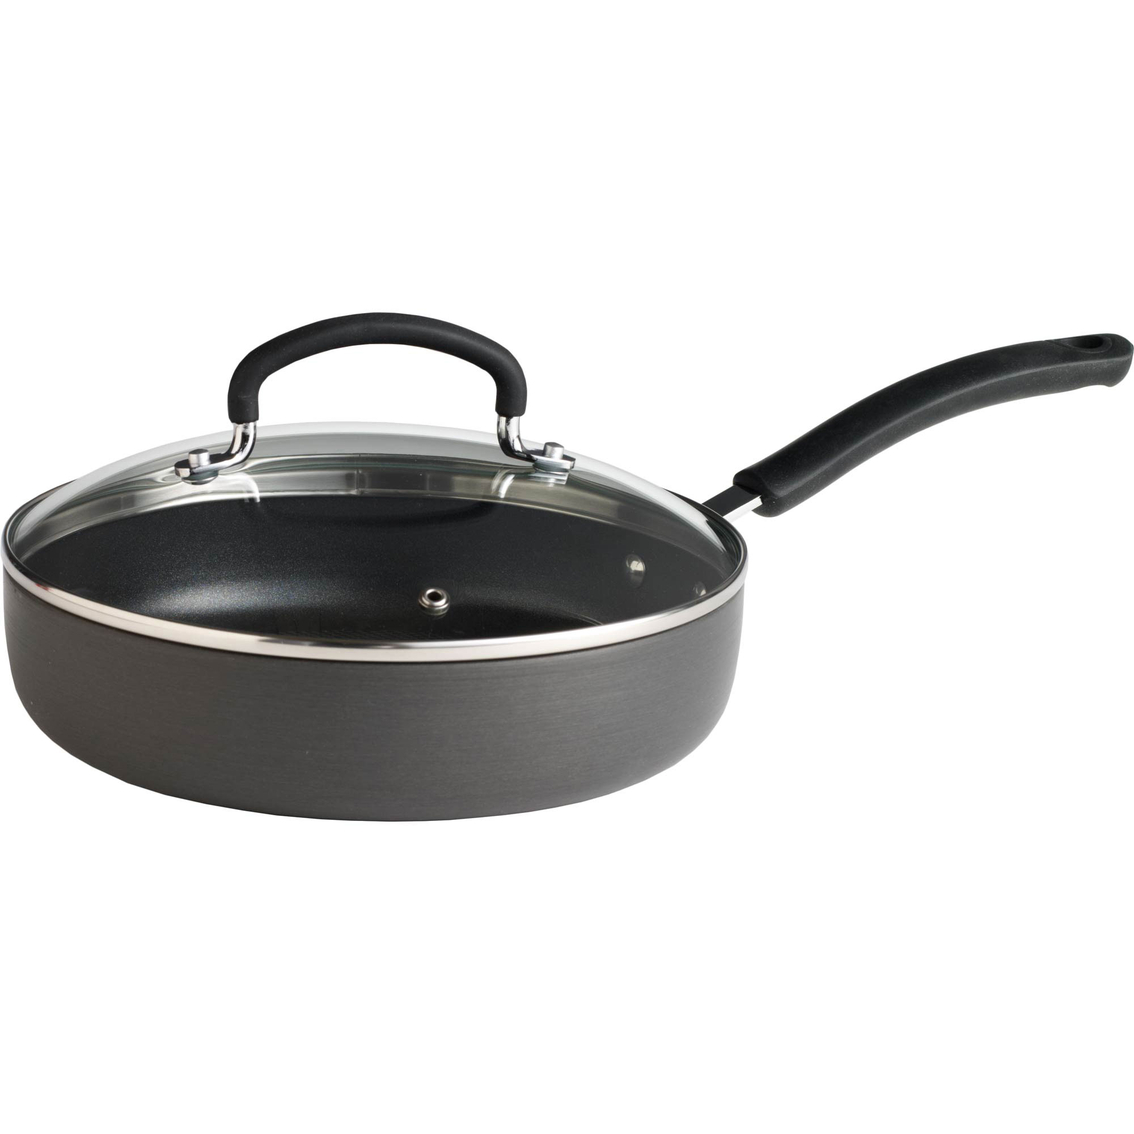 T-fal Ultimate Hard Anodized Nonstick 12-Inch Covered Deep Saute Pan 